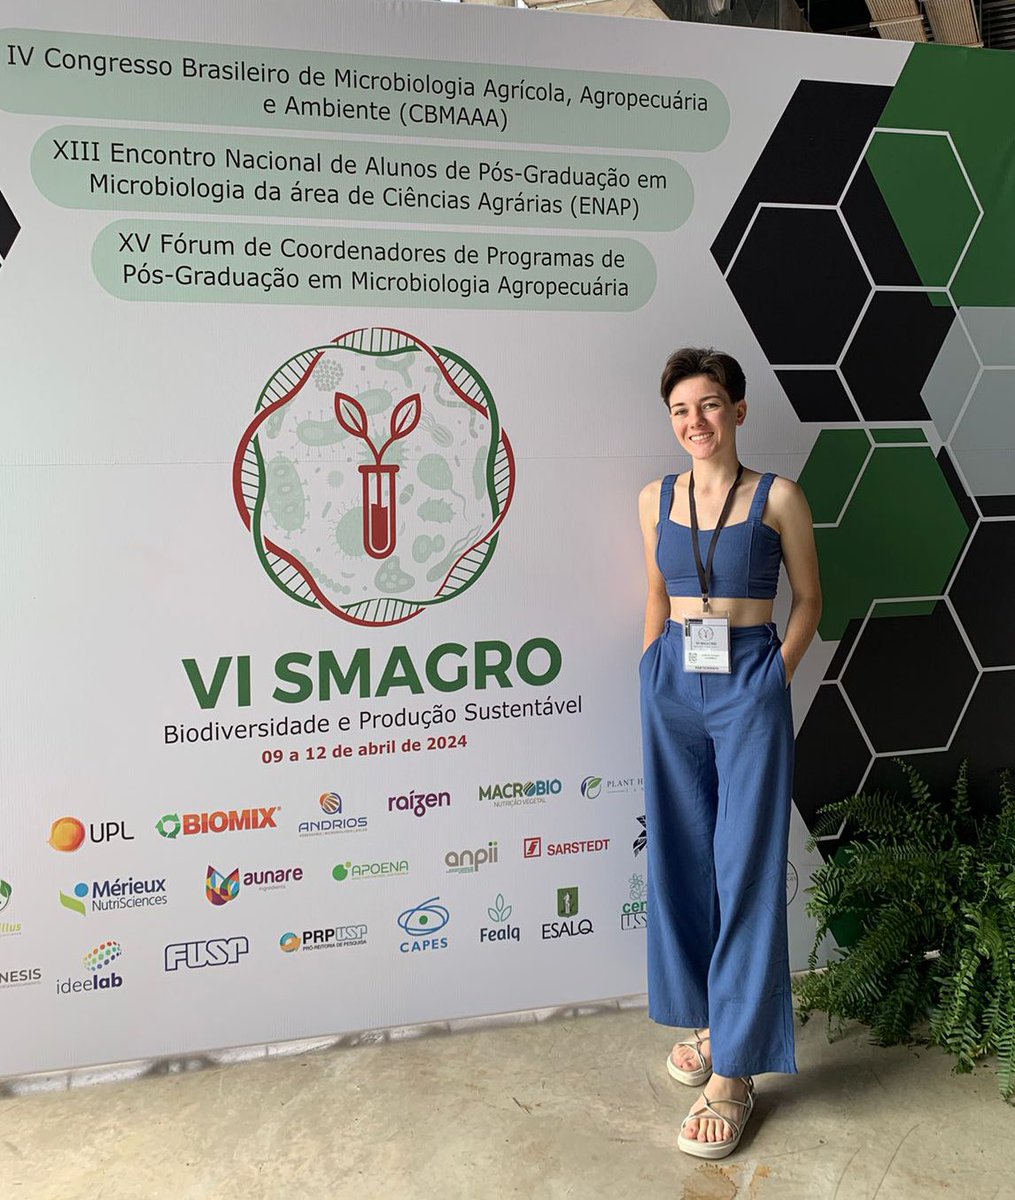 Wonderful week, with super interesting discussions about microorganisms in agriculture. I appreciate the opportunity! @ESALQMidias